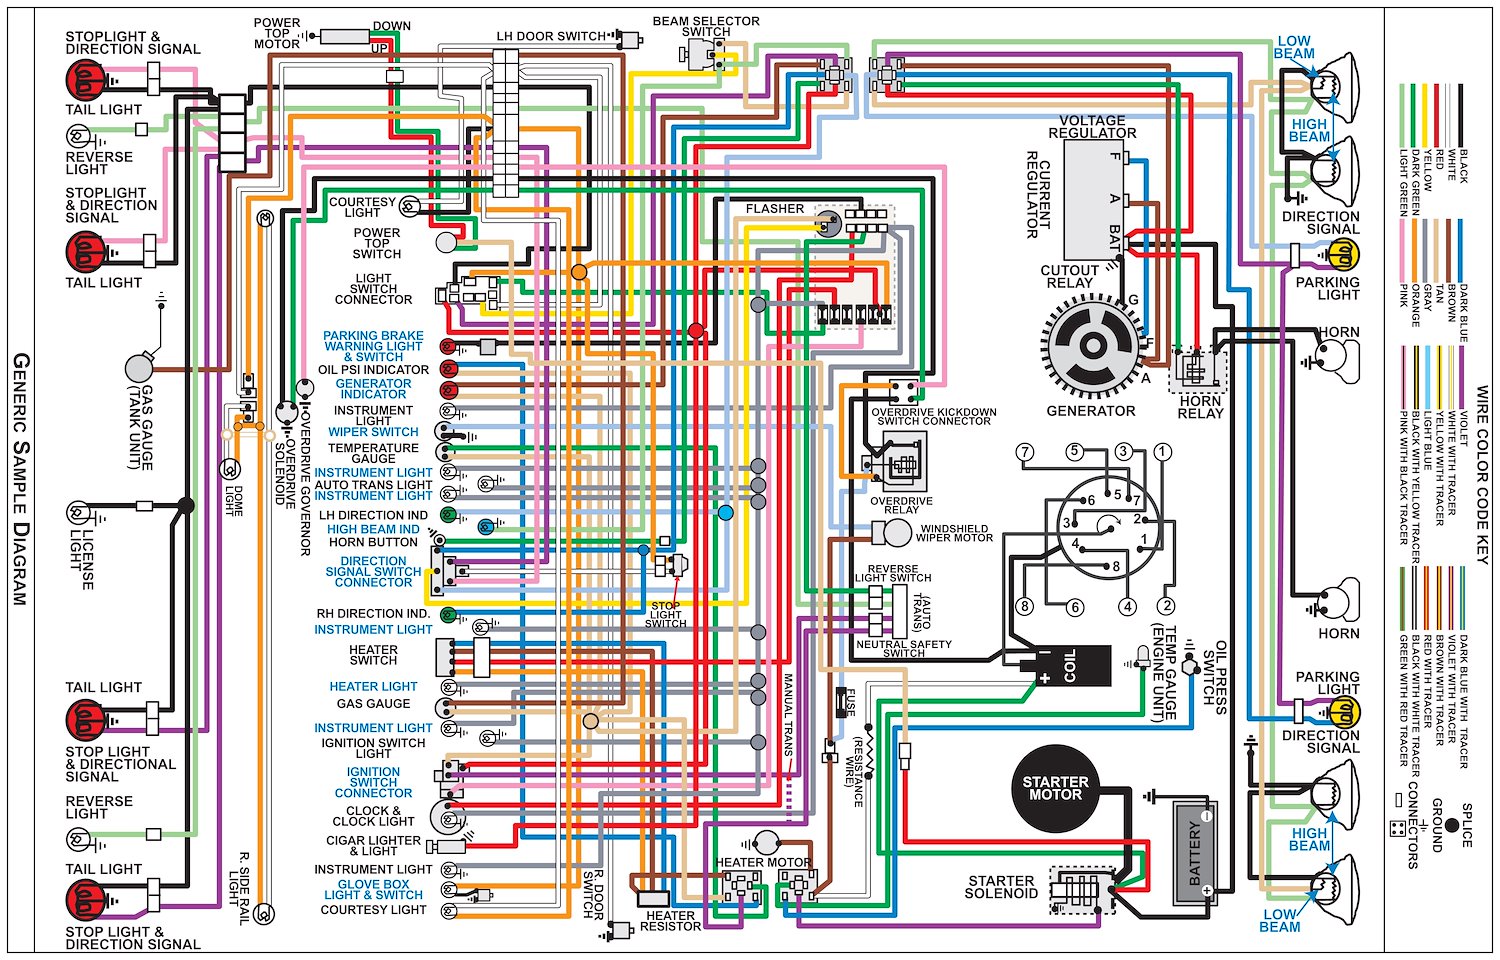 Wiring Diagram for 1974 Plymouth Road Runner, Satellite with Rallye Dash, 11 in x 17 in., Laminated